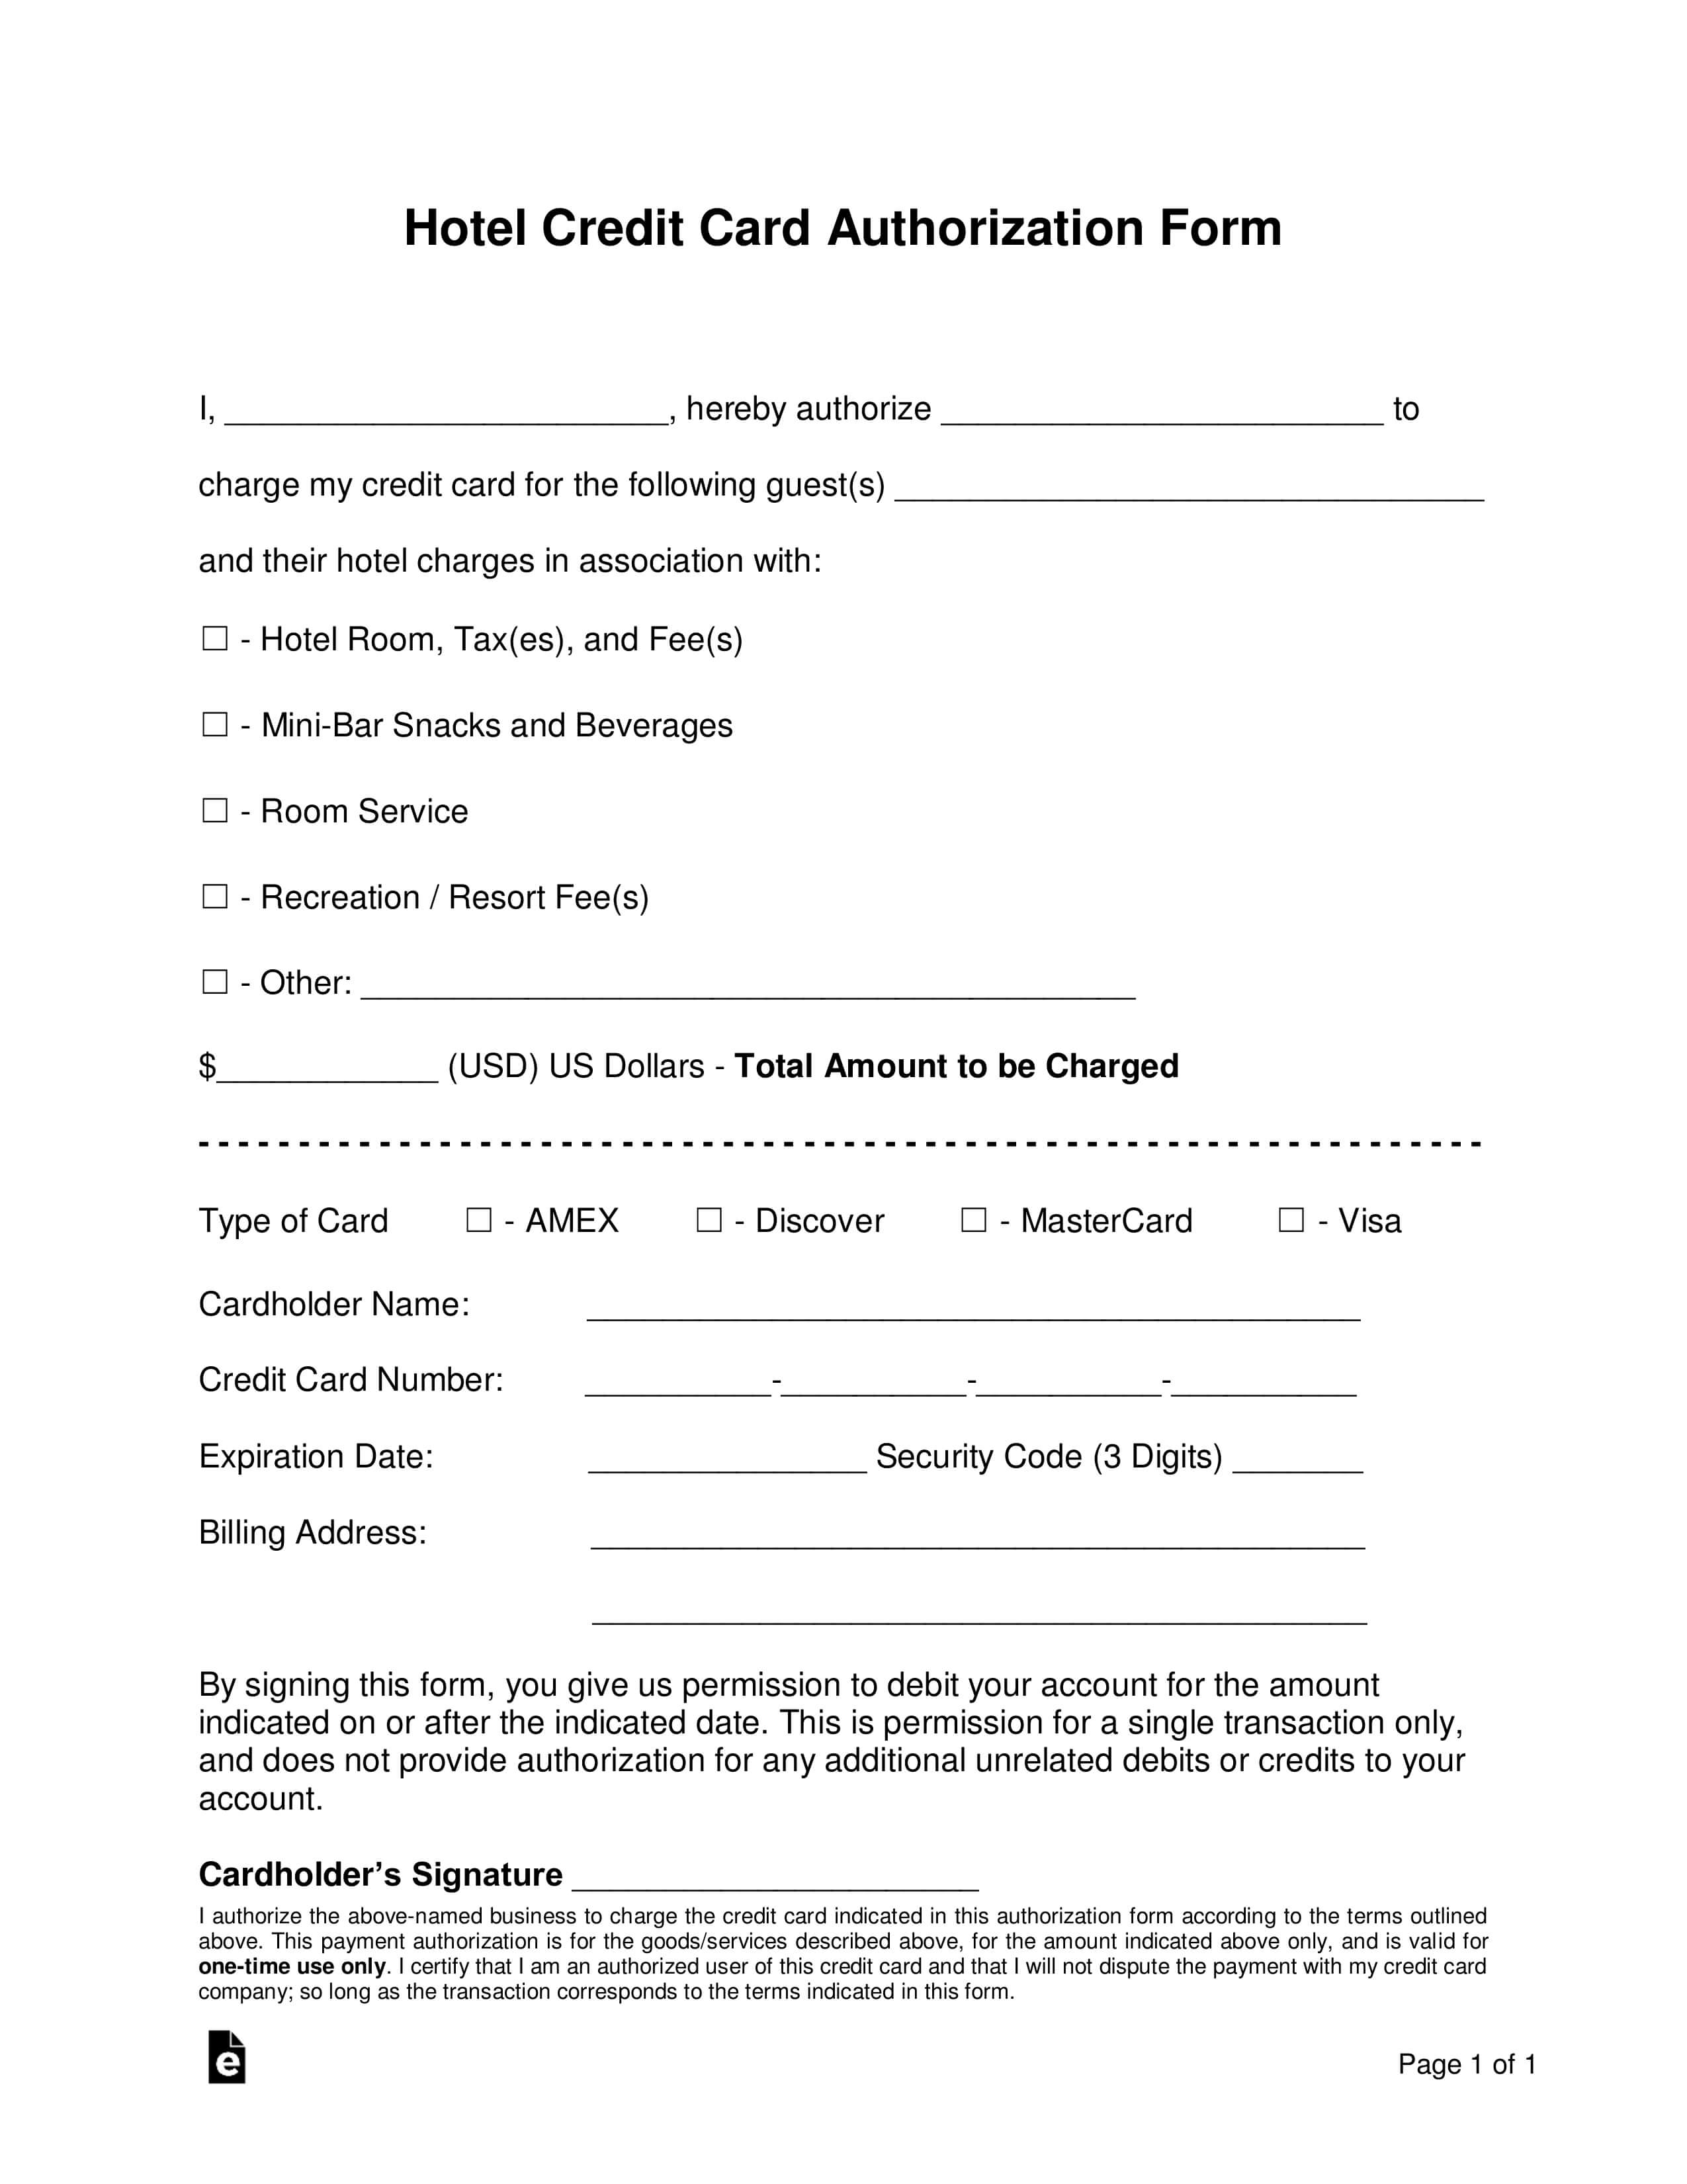 Free Hotel Credit Card Authorization Forms – Word | Pdf Throughout Hotel Credit Card Authorization Form Template